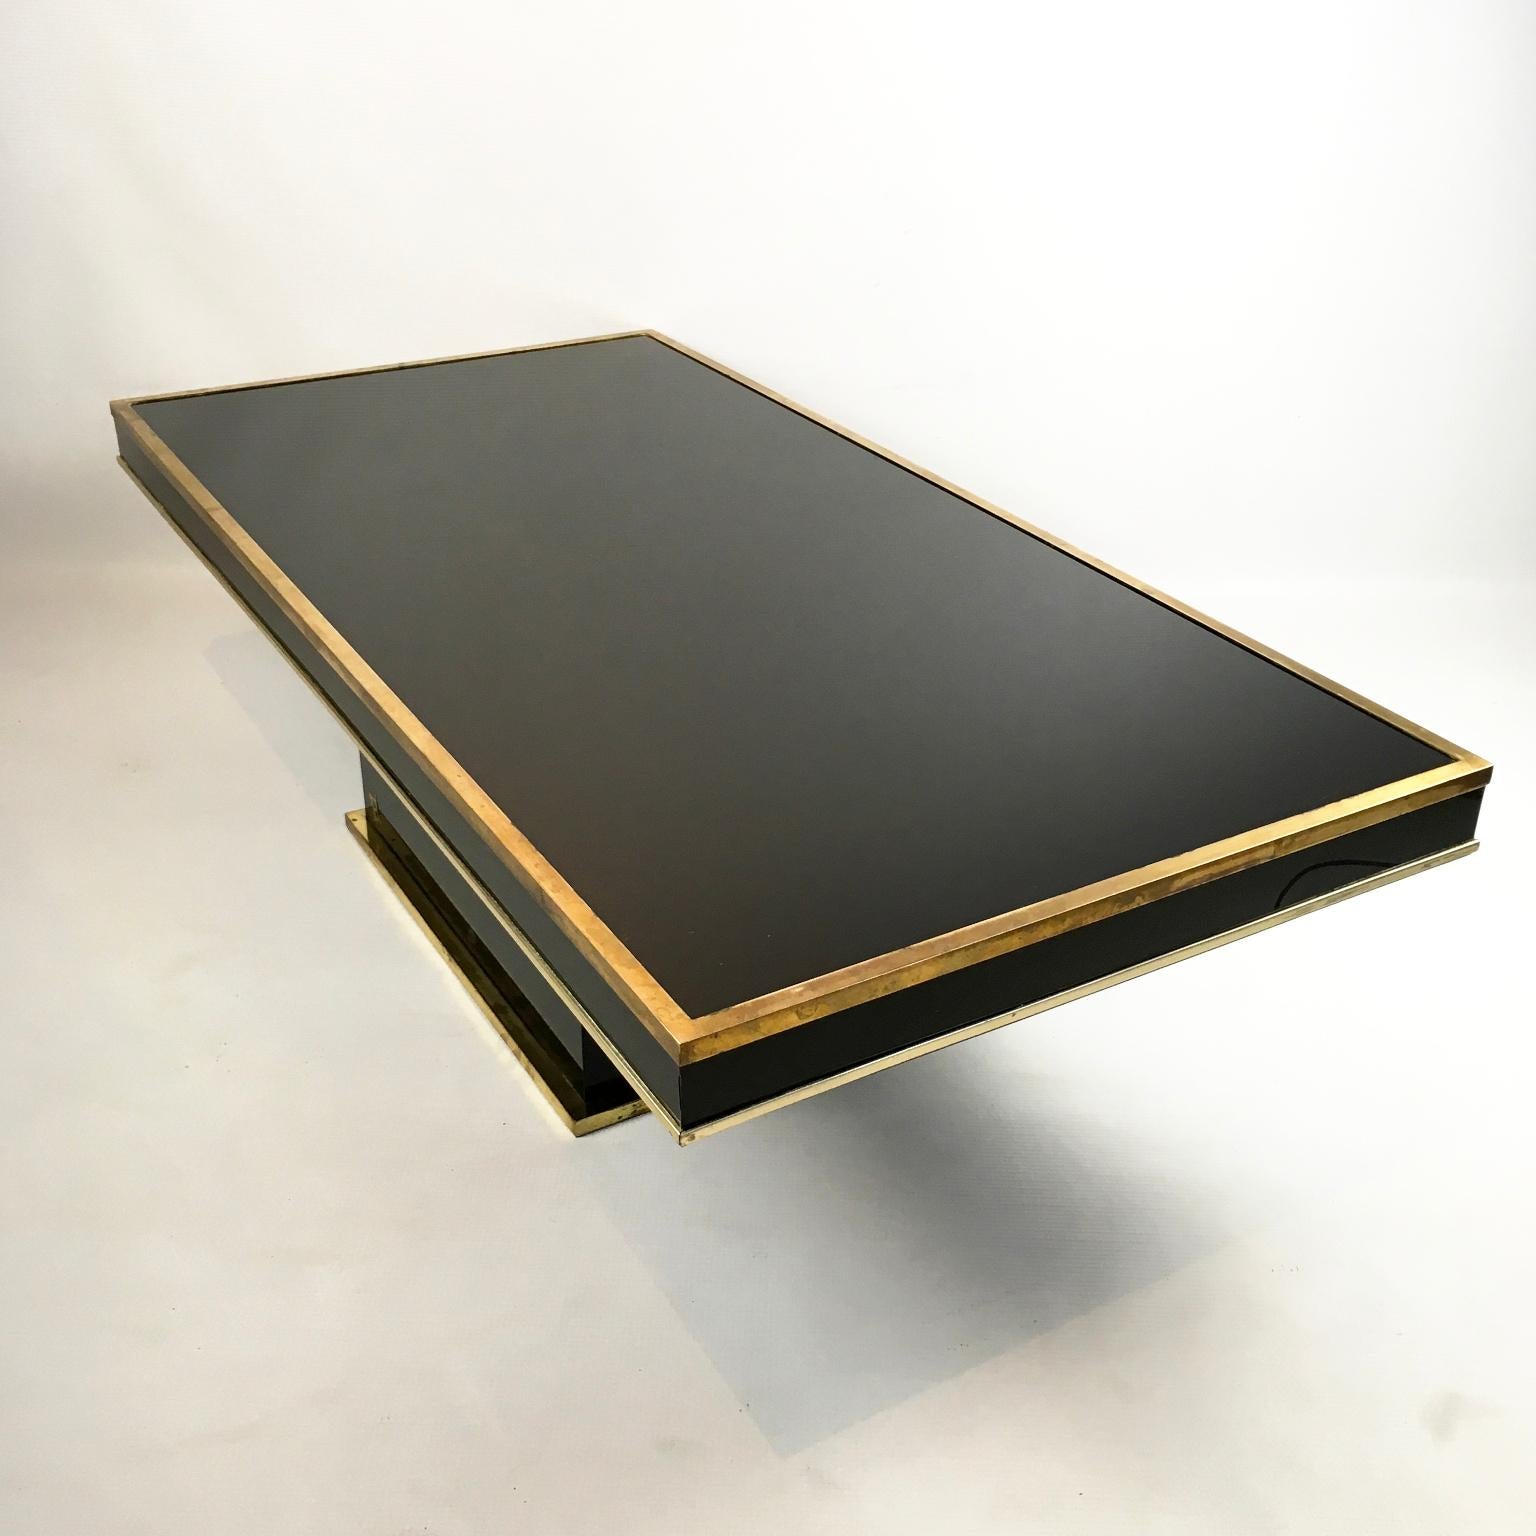 1970s Eric Maville coffee table with a black glass top and brass frame for Maison Roméo
Possibly in association with the designer Jean Claude Mahey.
Unfortunately, the brass 